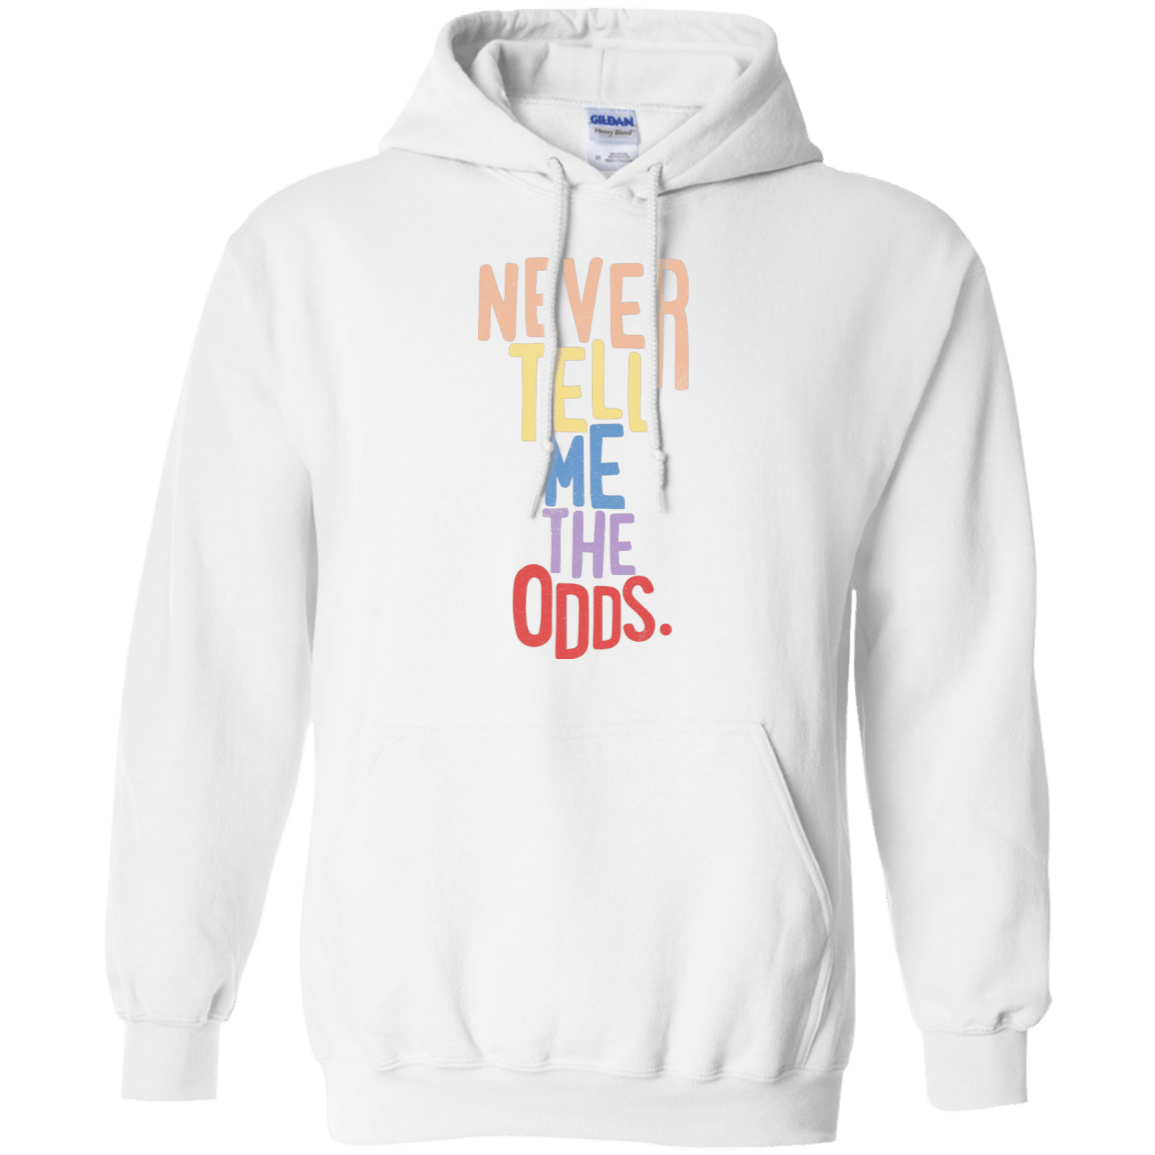 Sweatshirts White / S Roll the Dice Pullover Hoodie